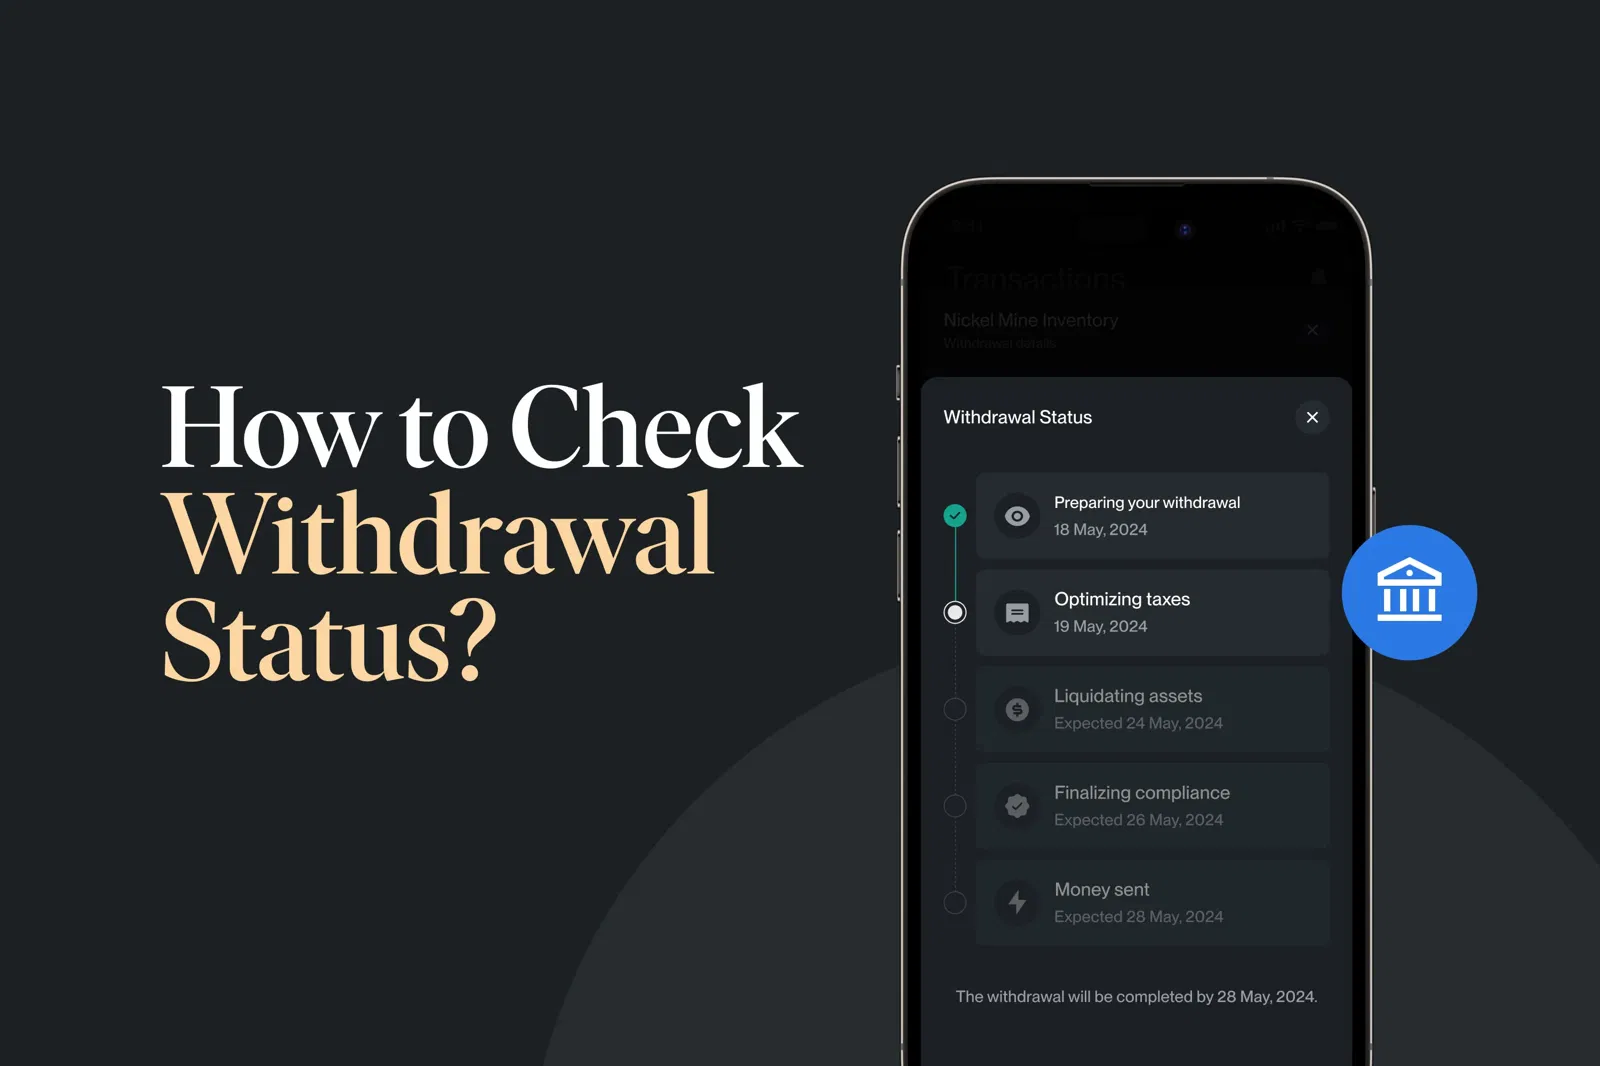 How to check withdrawal status?